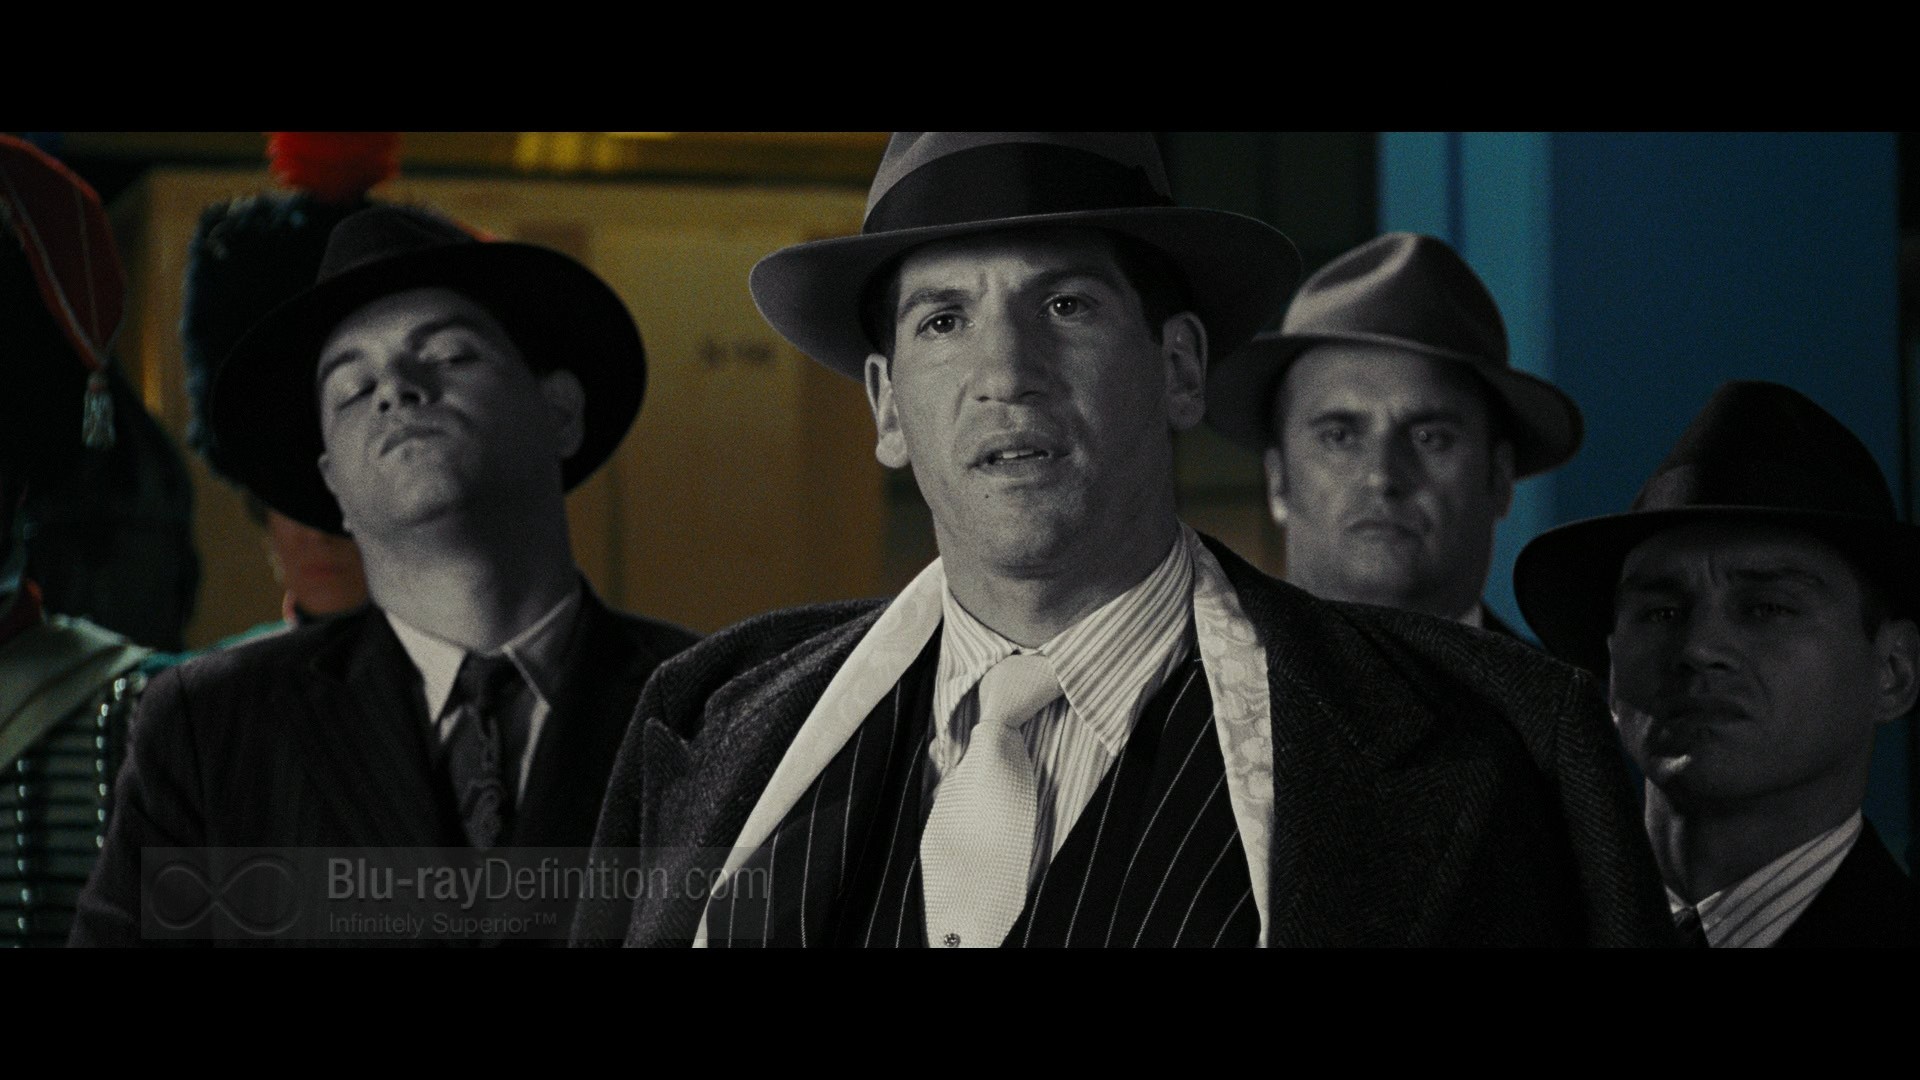 1920x1080 Chicago Crime Syndicate | Night At The Museum Wiki | FANDOM powered by Wikia